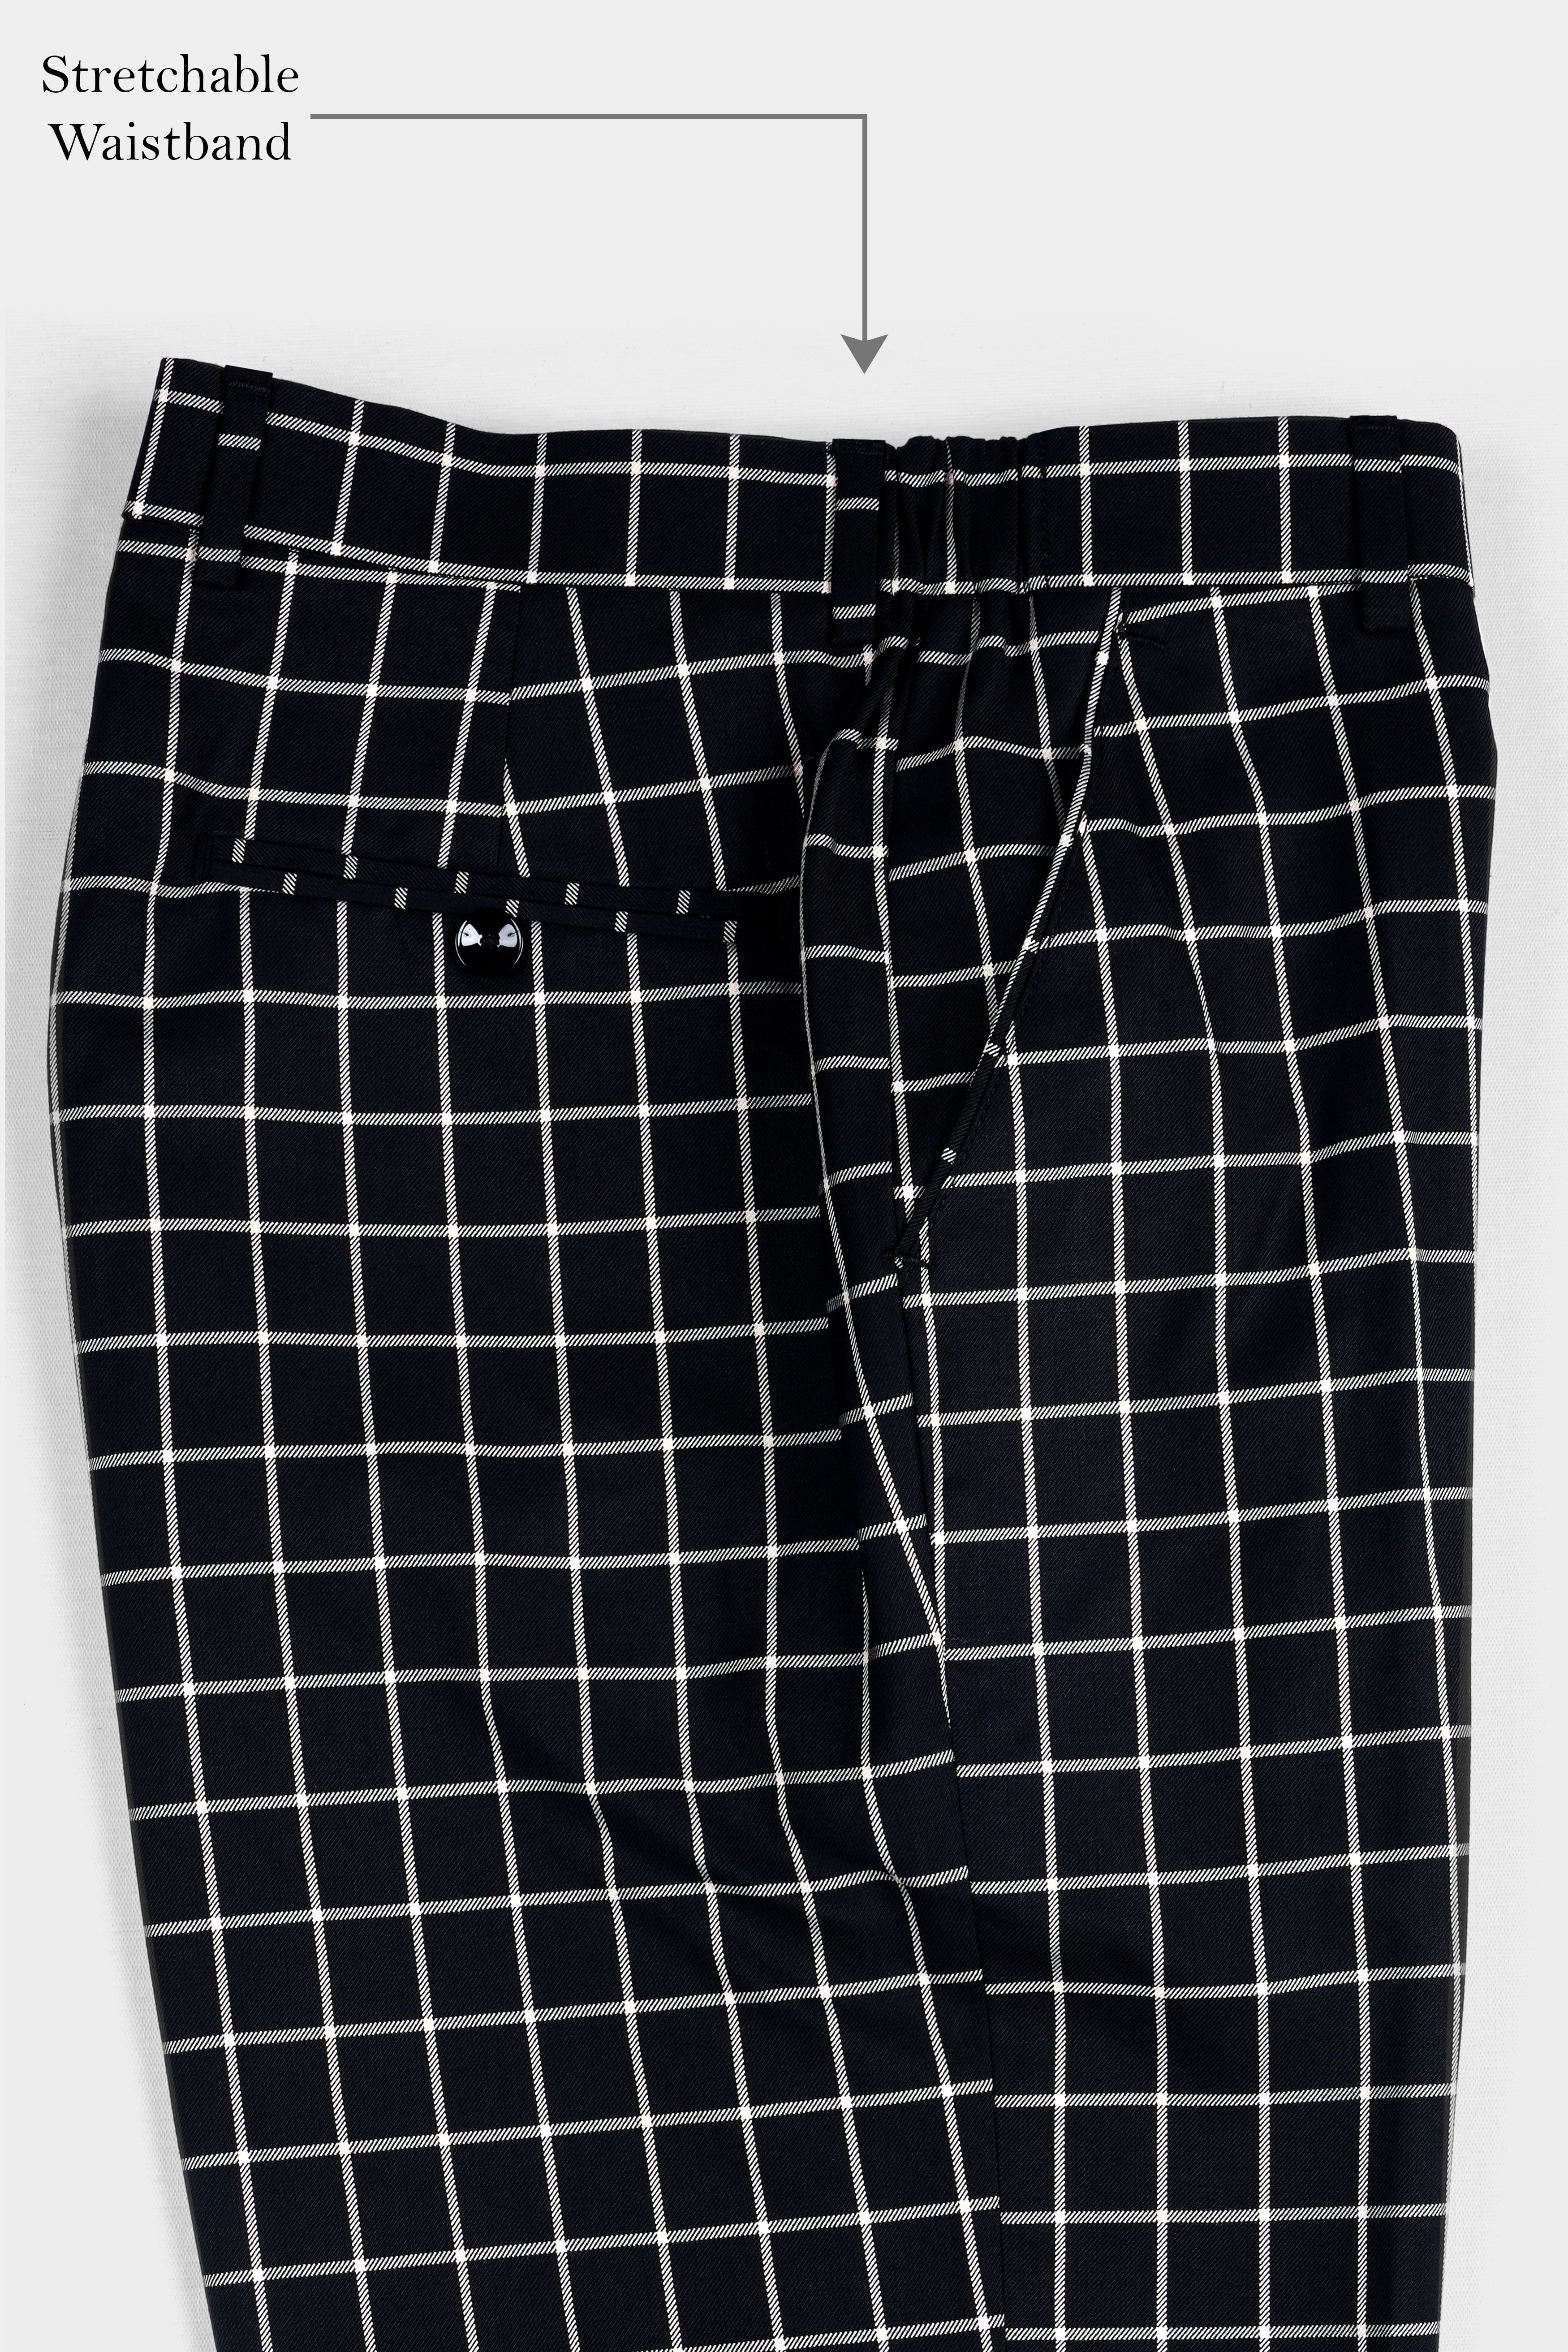 Jade Black and White Checkered Wool Rich Stretchable Pant T2932-SW-28, T2932-SW-30, T2932-SW-32, T2932-SW-34, T2932-SW-36, T2932-SW-38, T2932-SW-40, T2932-SW-42, T2932-SW-44